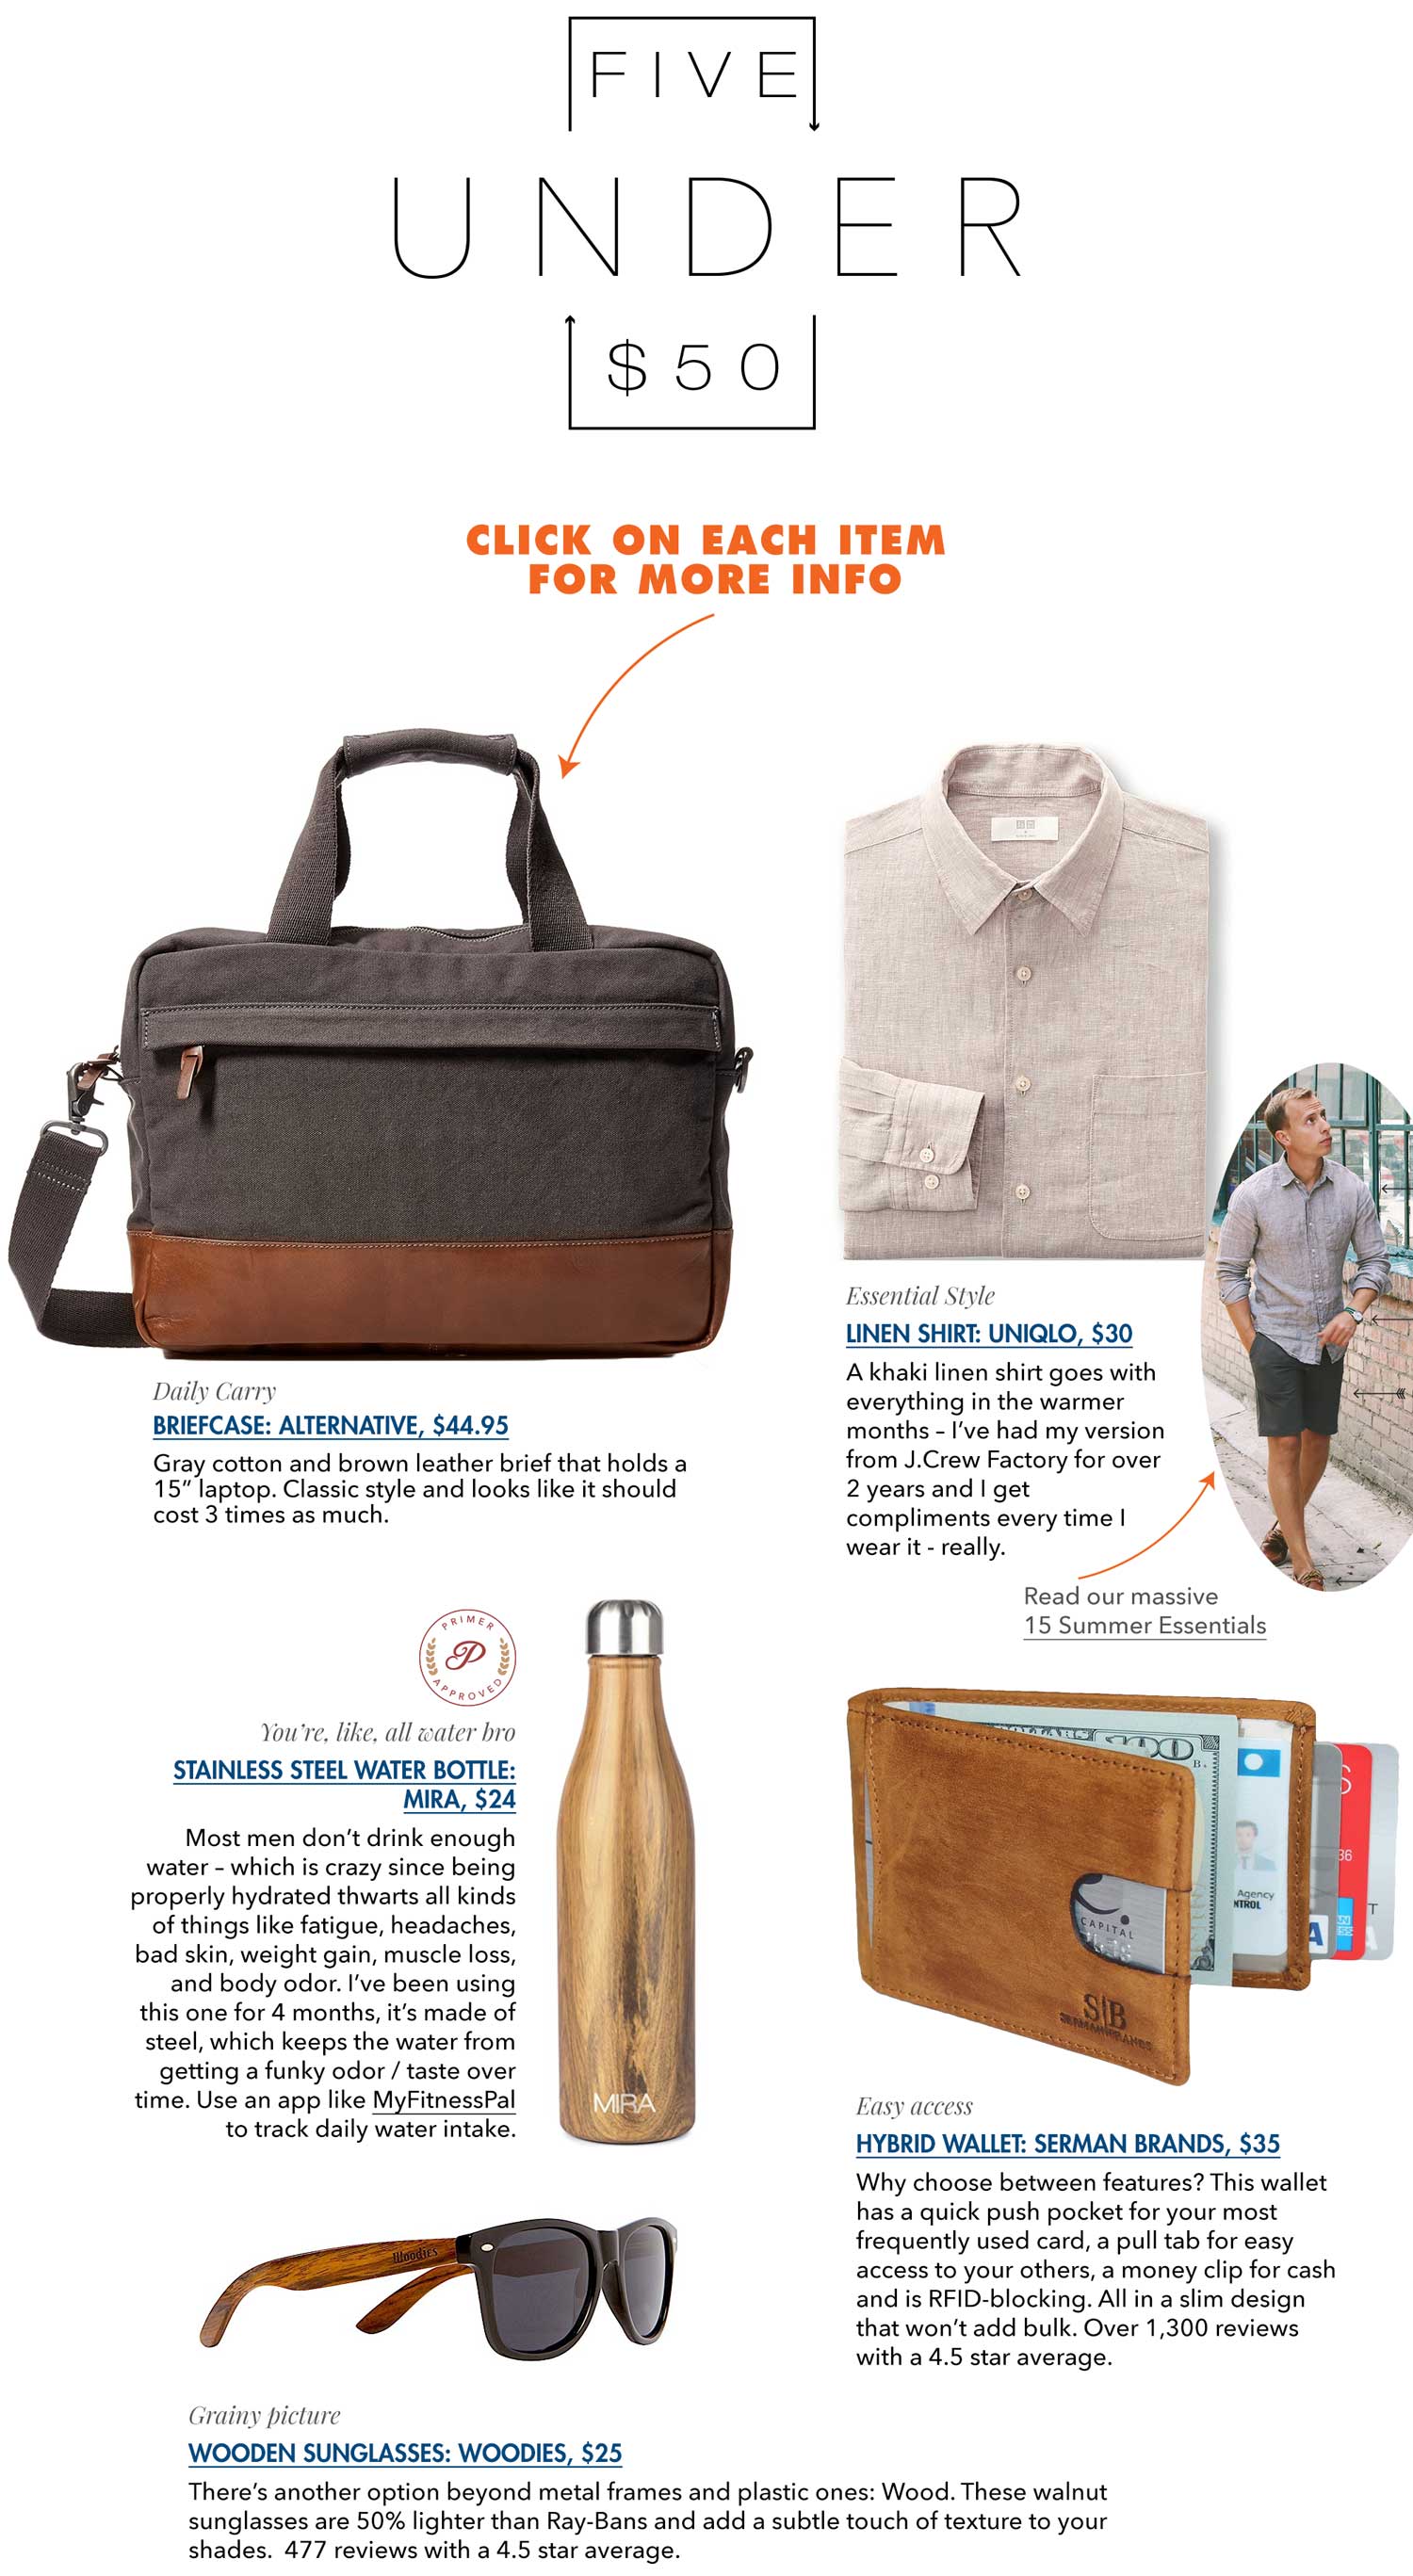 5 under 50 with briefcase linen shirt, wallet, water bottle, and sunglasses